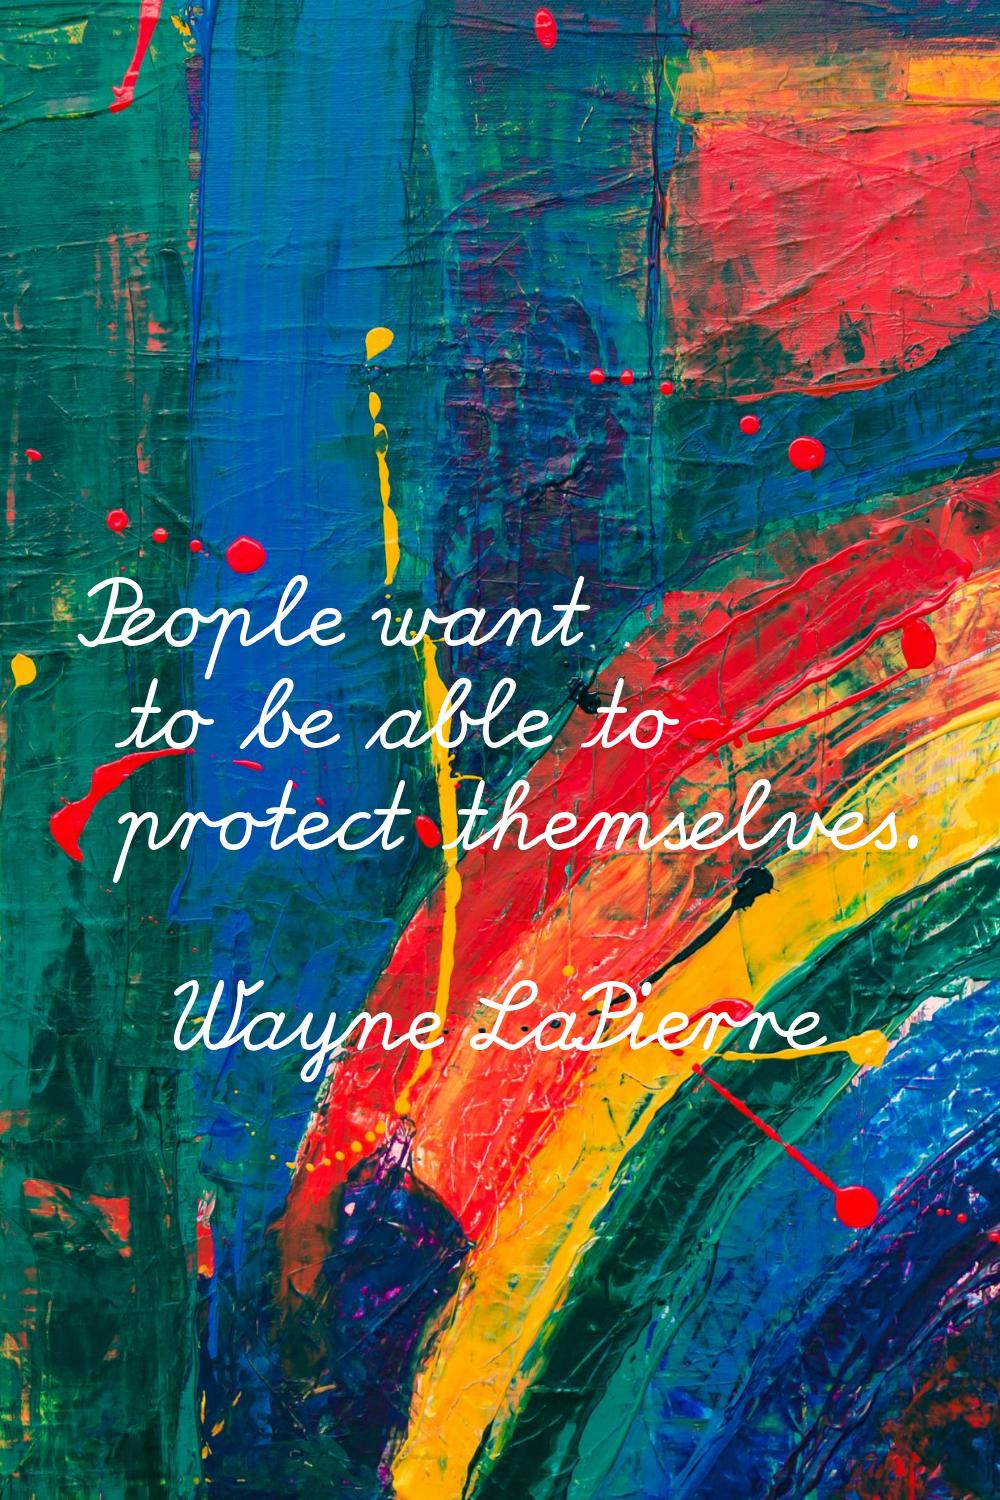 People want to be able to protect themselves.